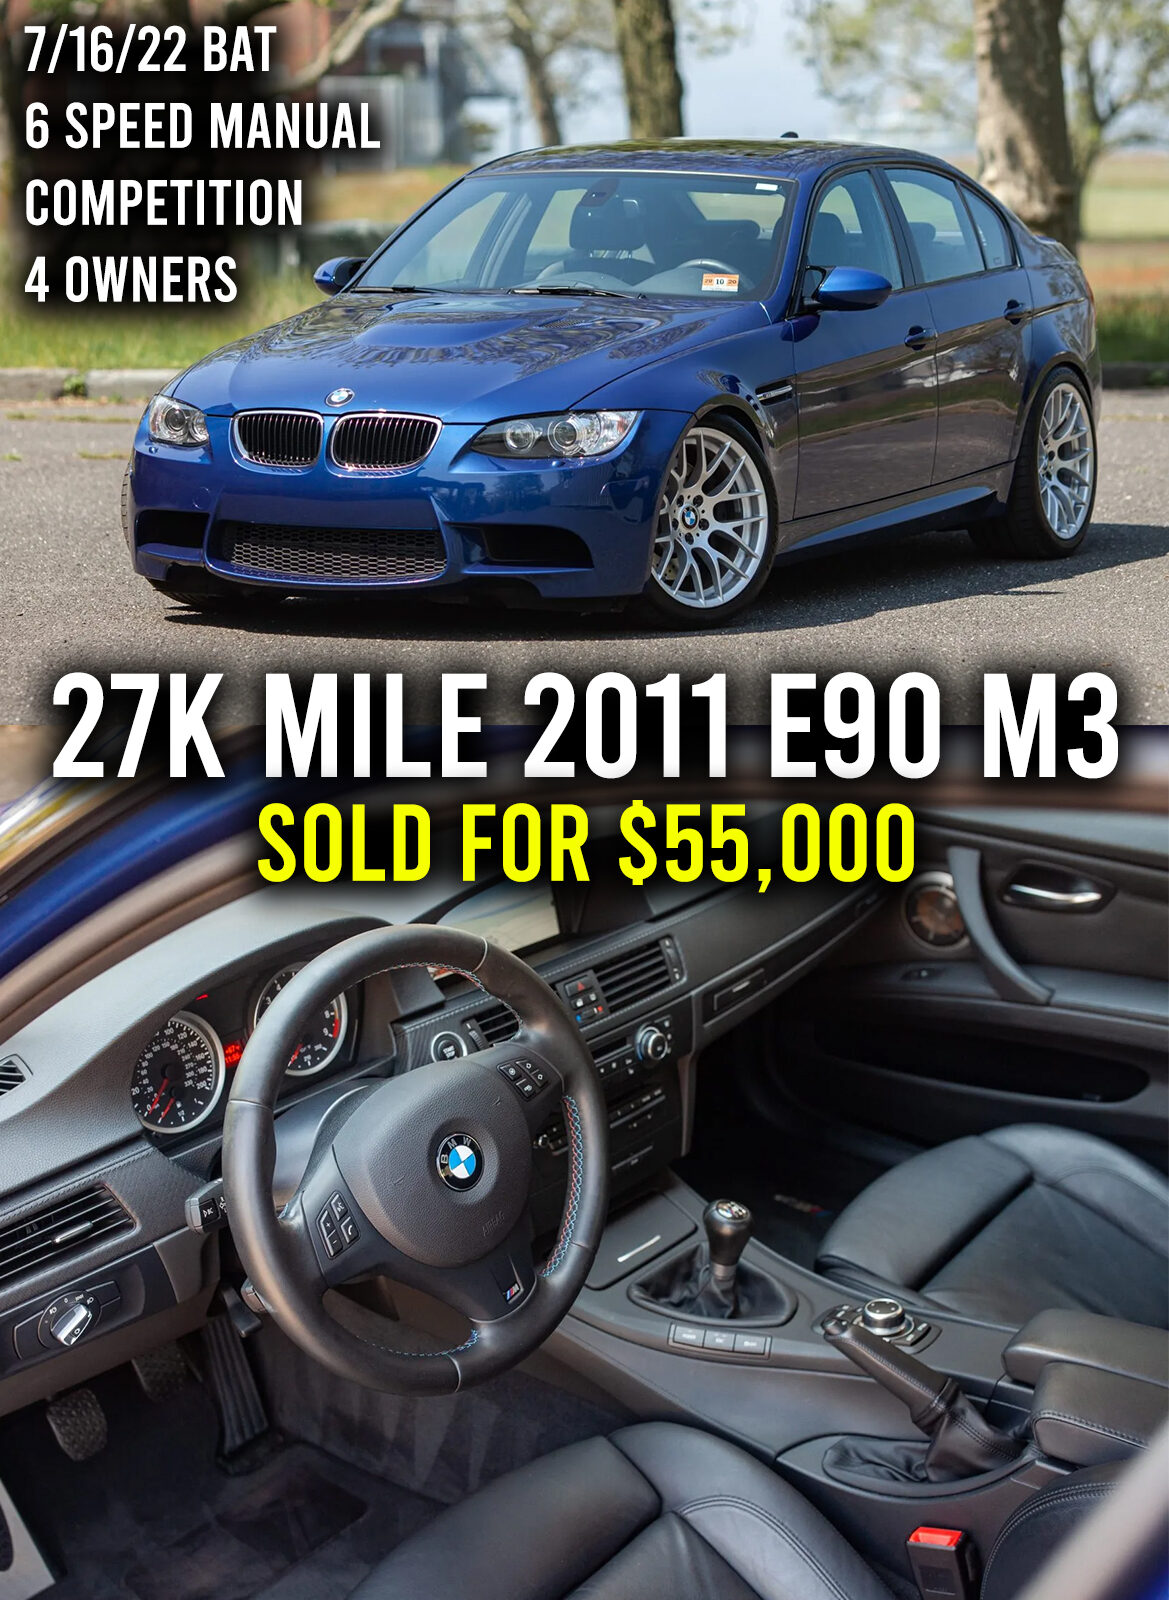 Low mile E90 M3 sells for $55,000 on Bring A Trailer